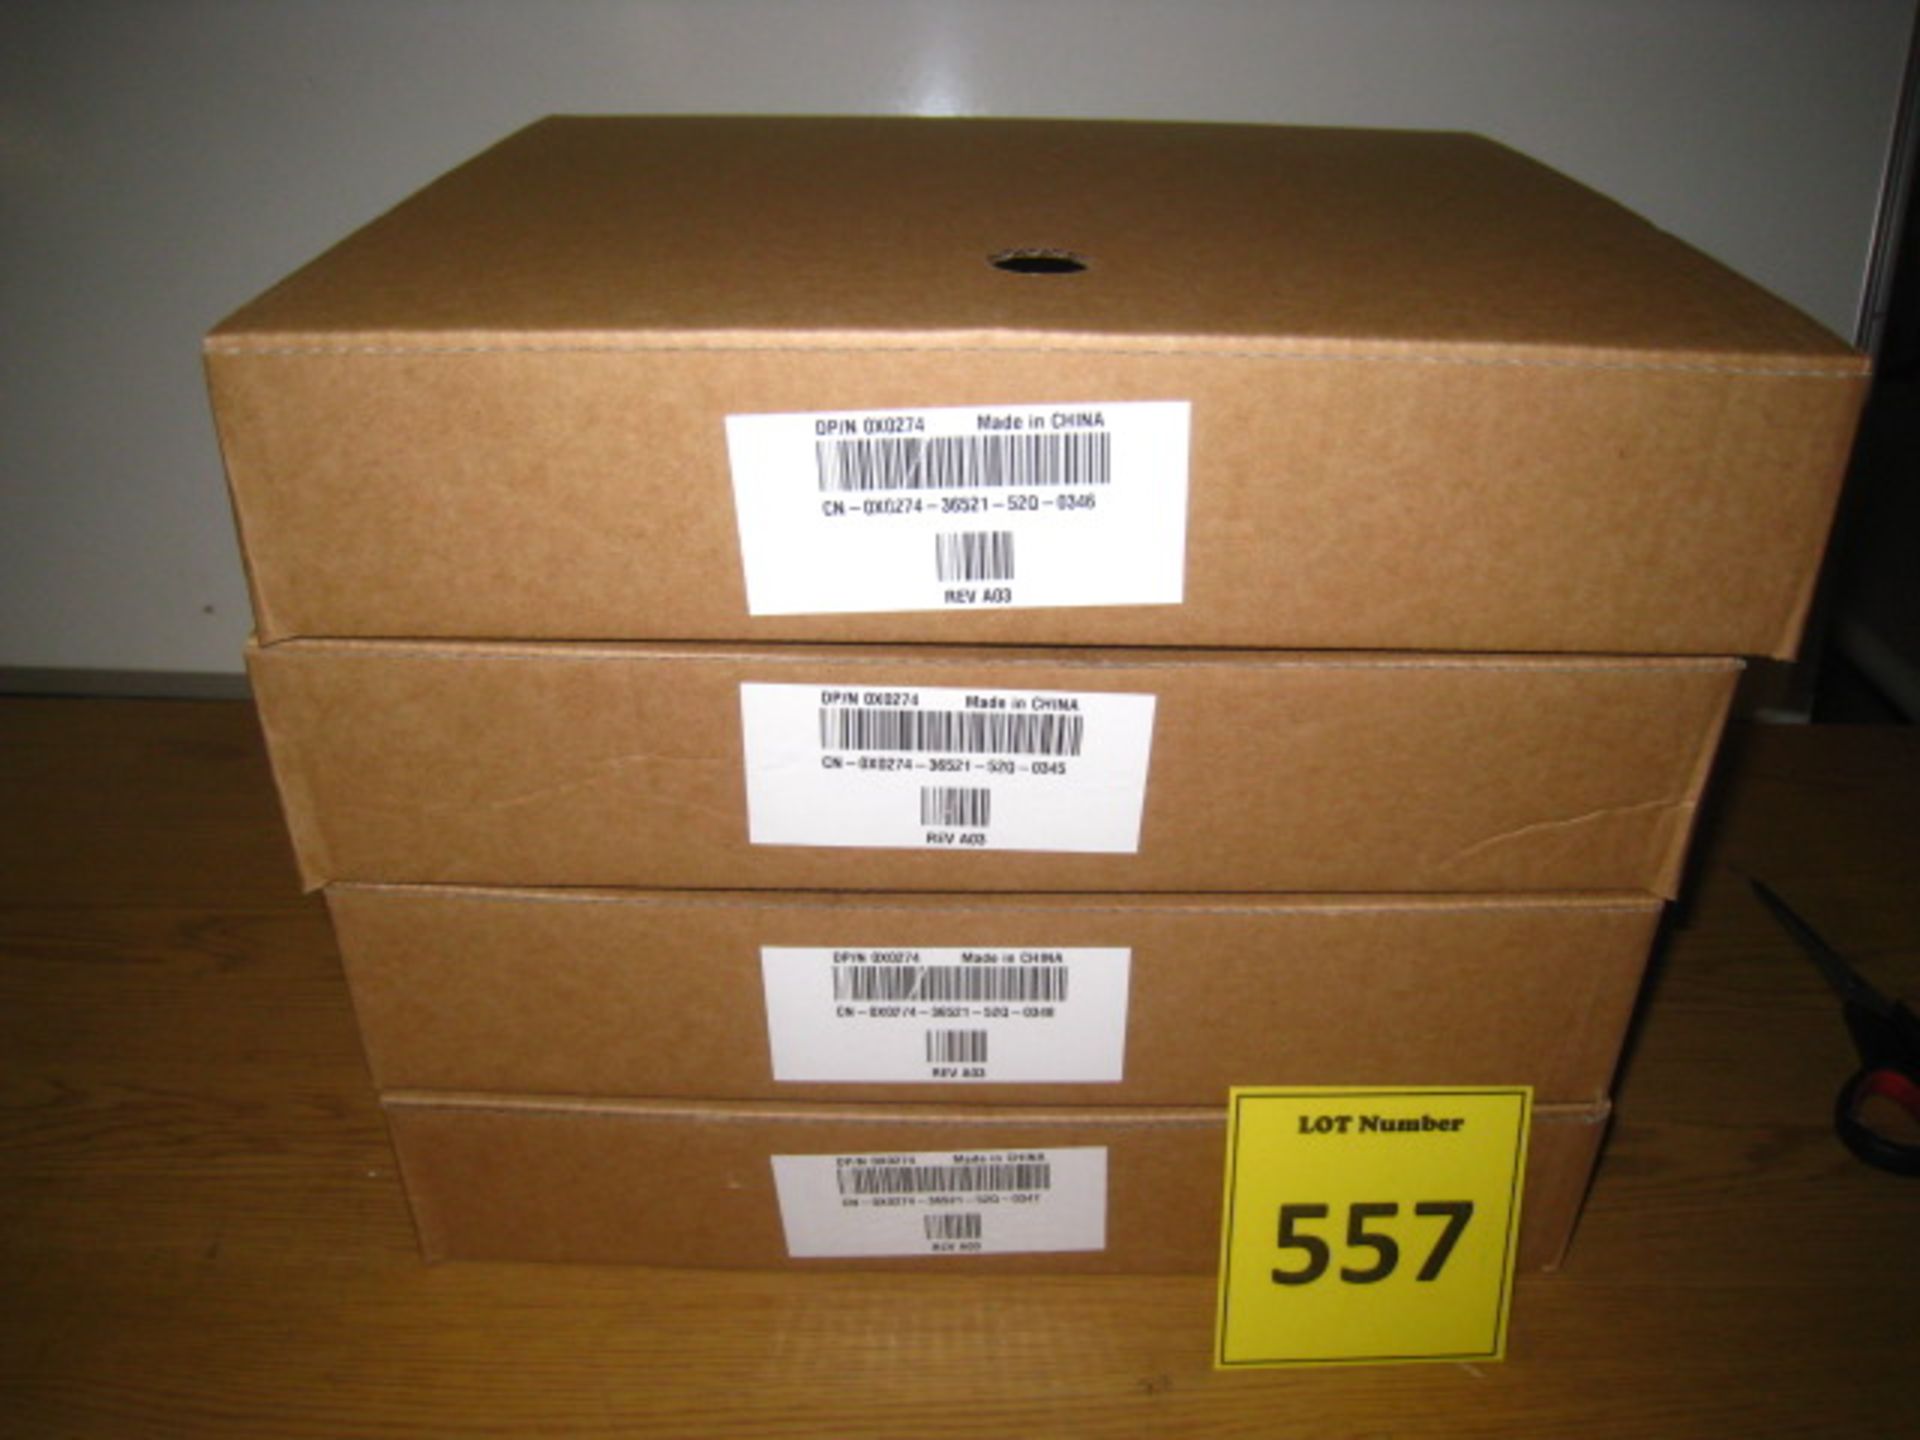 4 X NEW AND BOXED DELL PR04S MEDIA BASE / DOCKING STATIONS WITH POWER SUPPLIES. DELL P/N 0X0274